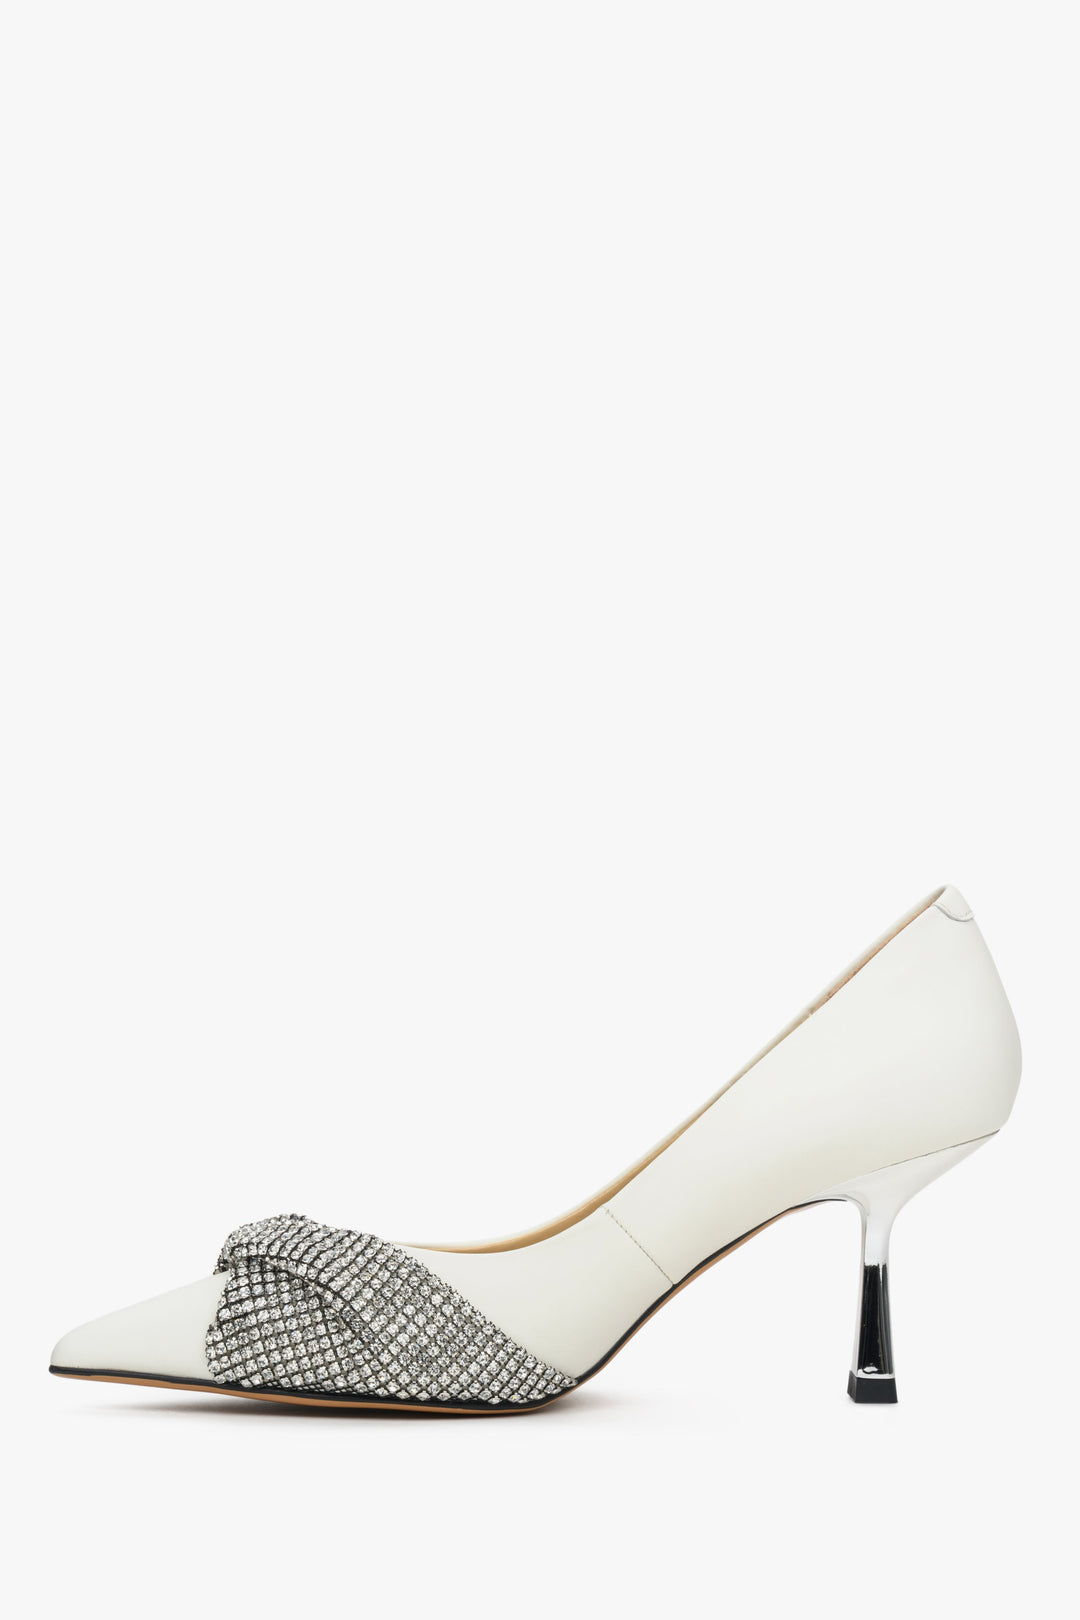 Women's white leather high heels with silver accents - shoe profile.